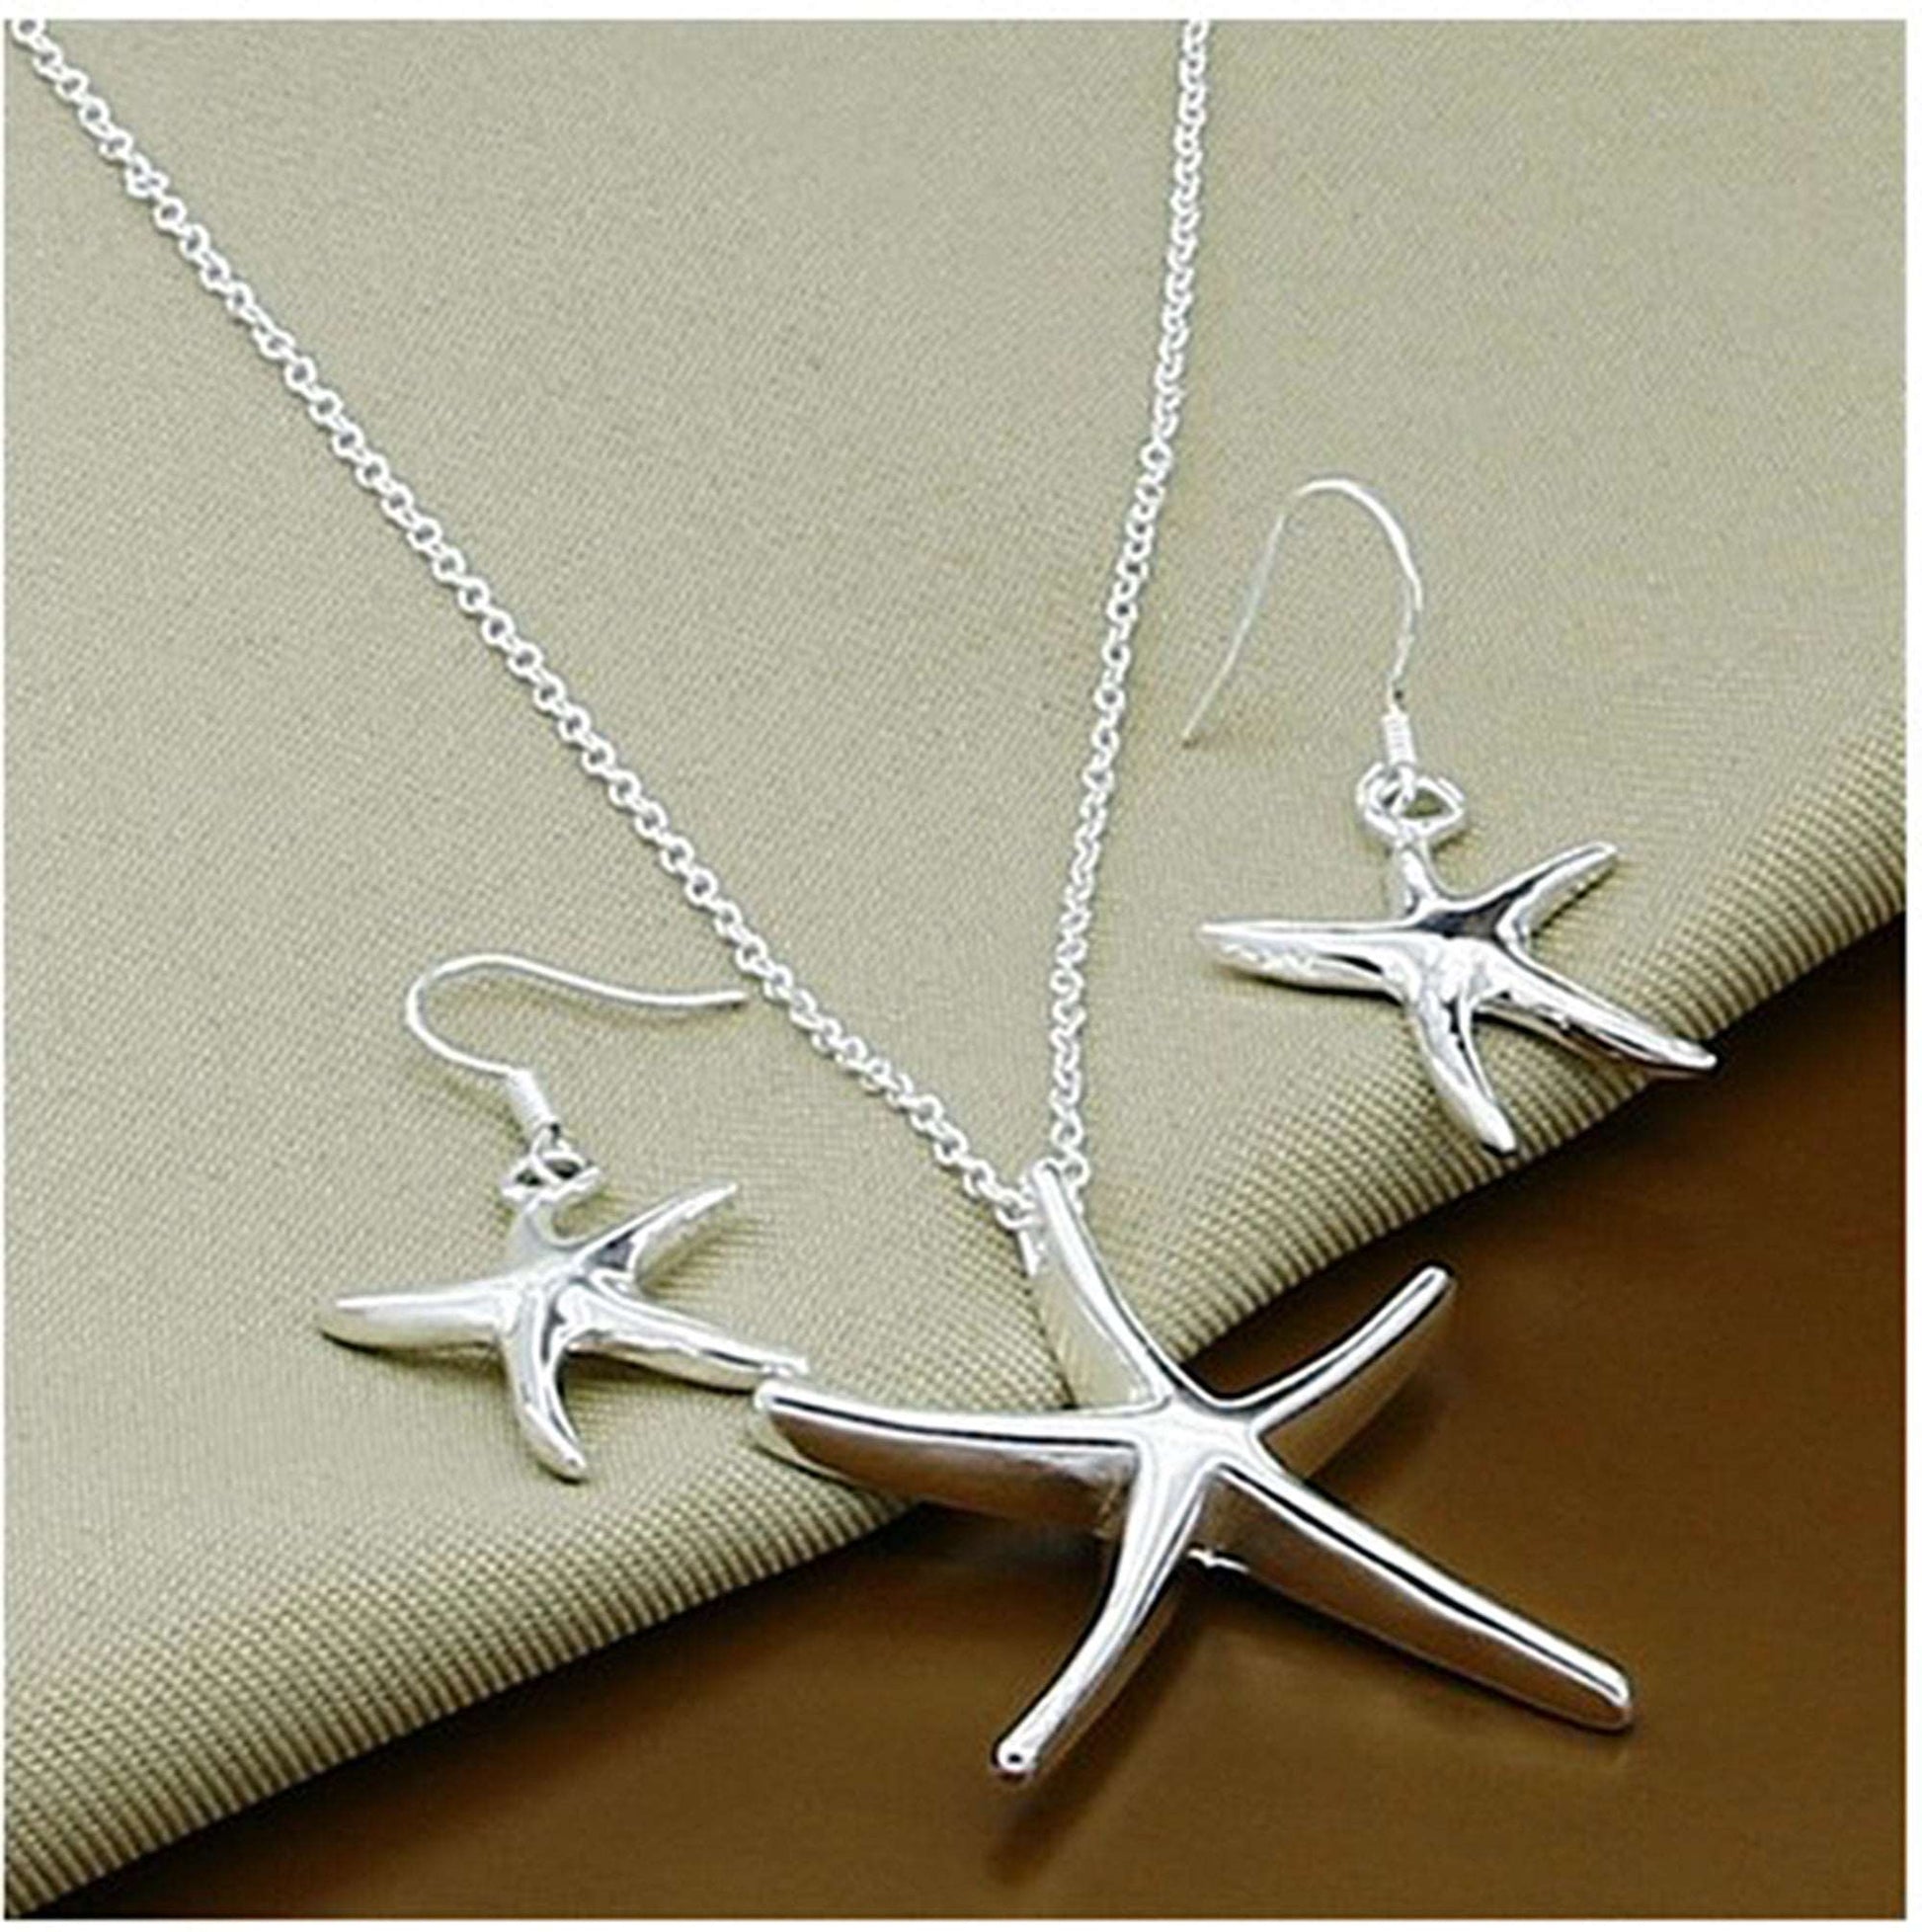 Elegant Star Fish sterling silver necklace and earring sets - Providence silver gold jewelry usa